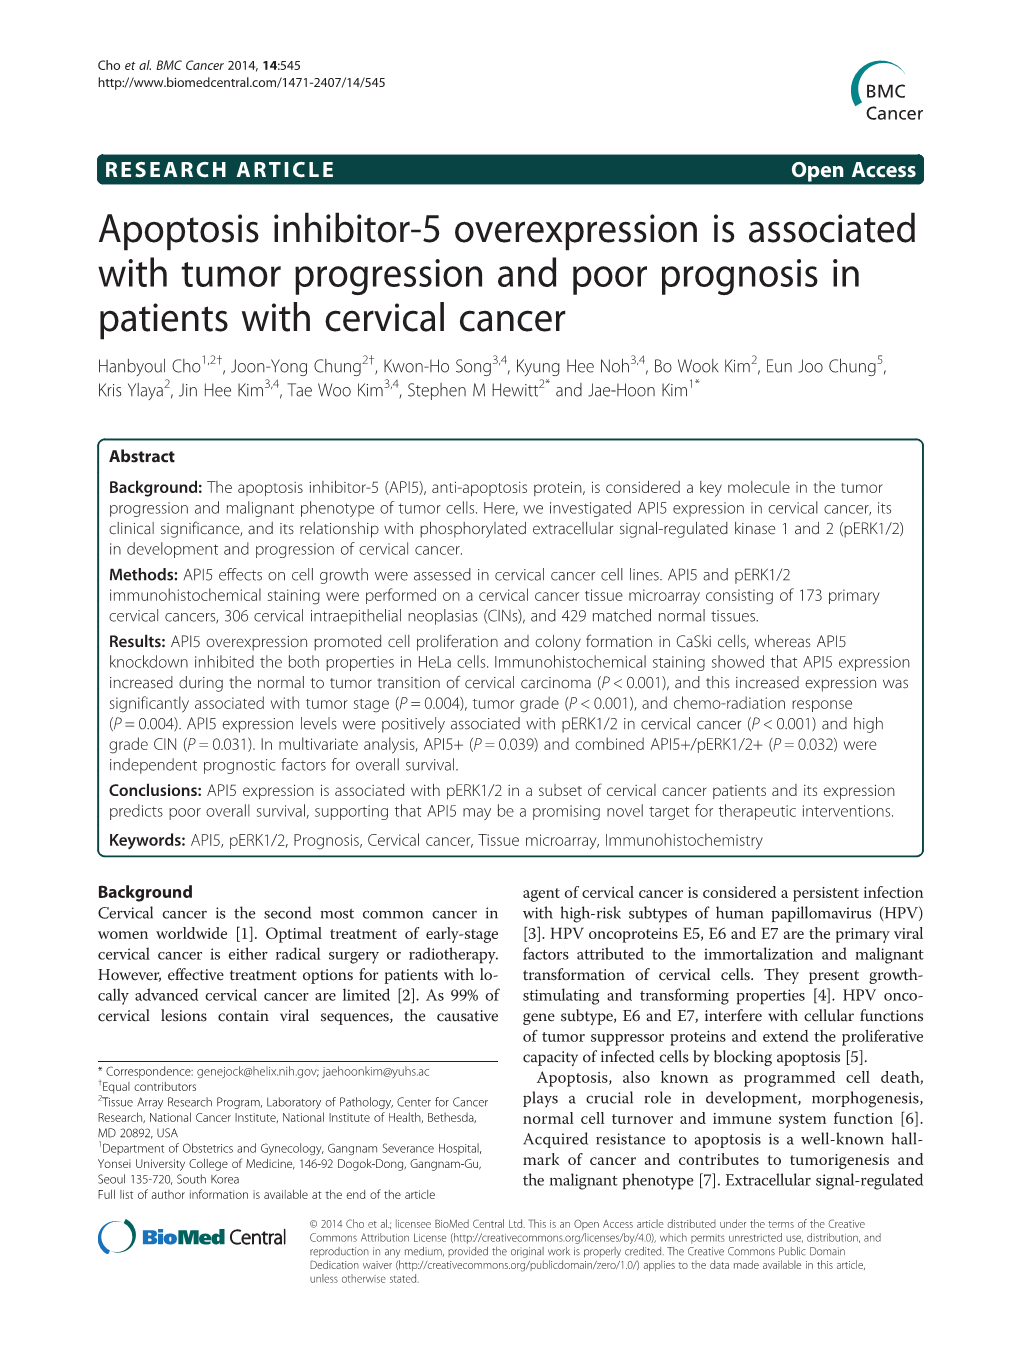 Apoptosis Inhibitor-5 Overexpression Is Associated with Tumor